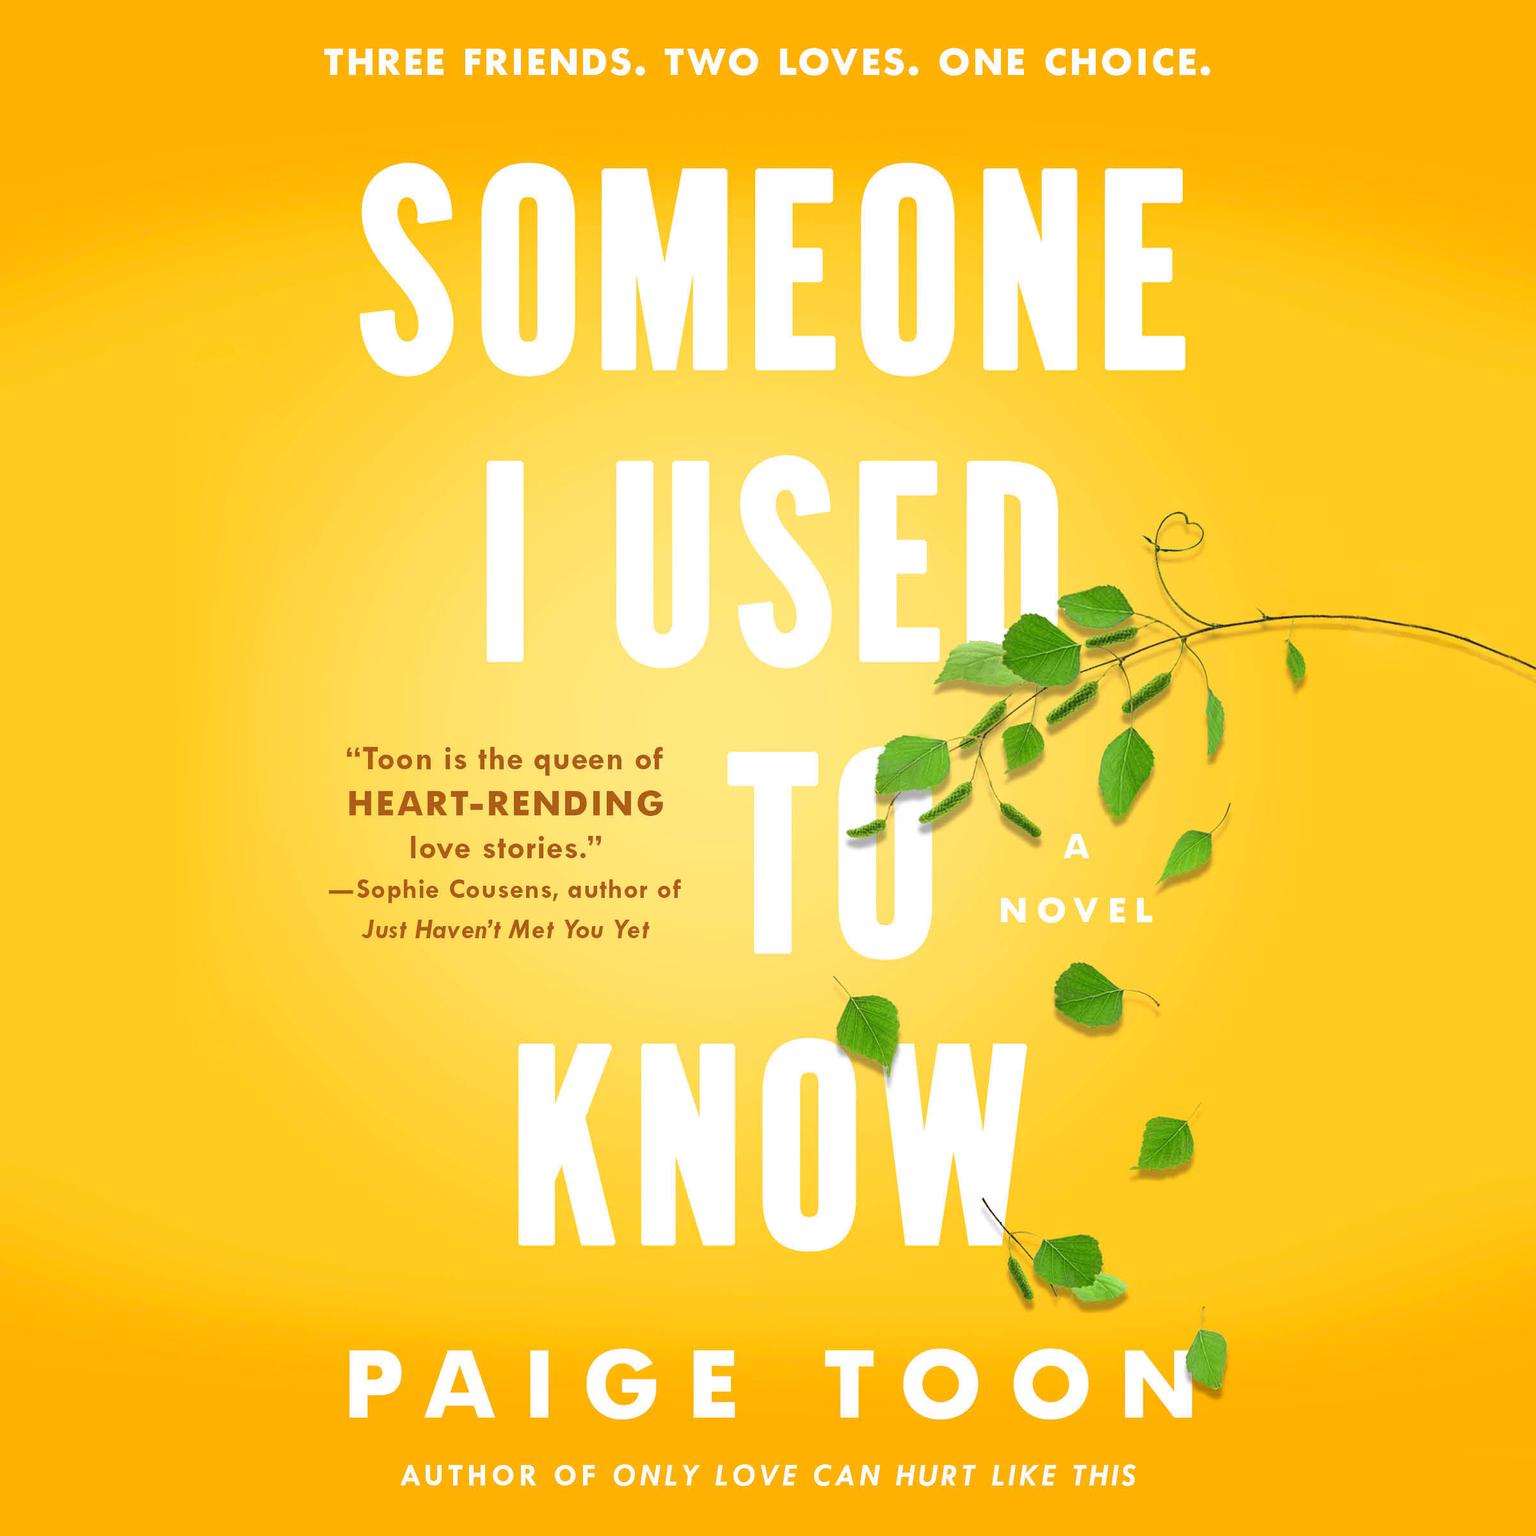 Someone I Used to Know Audiobook, by Paige Toon